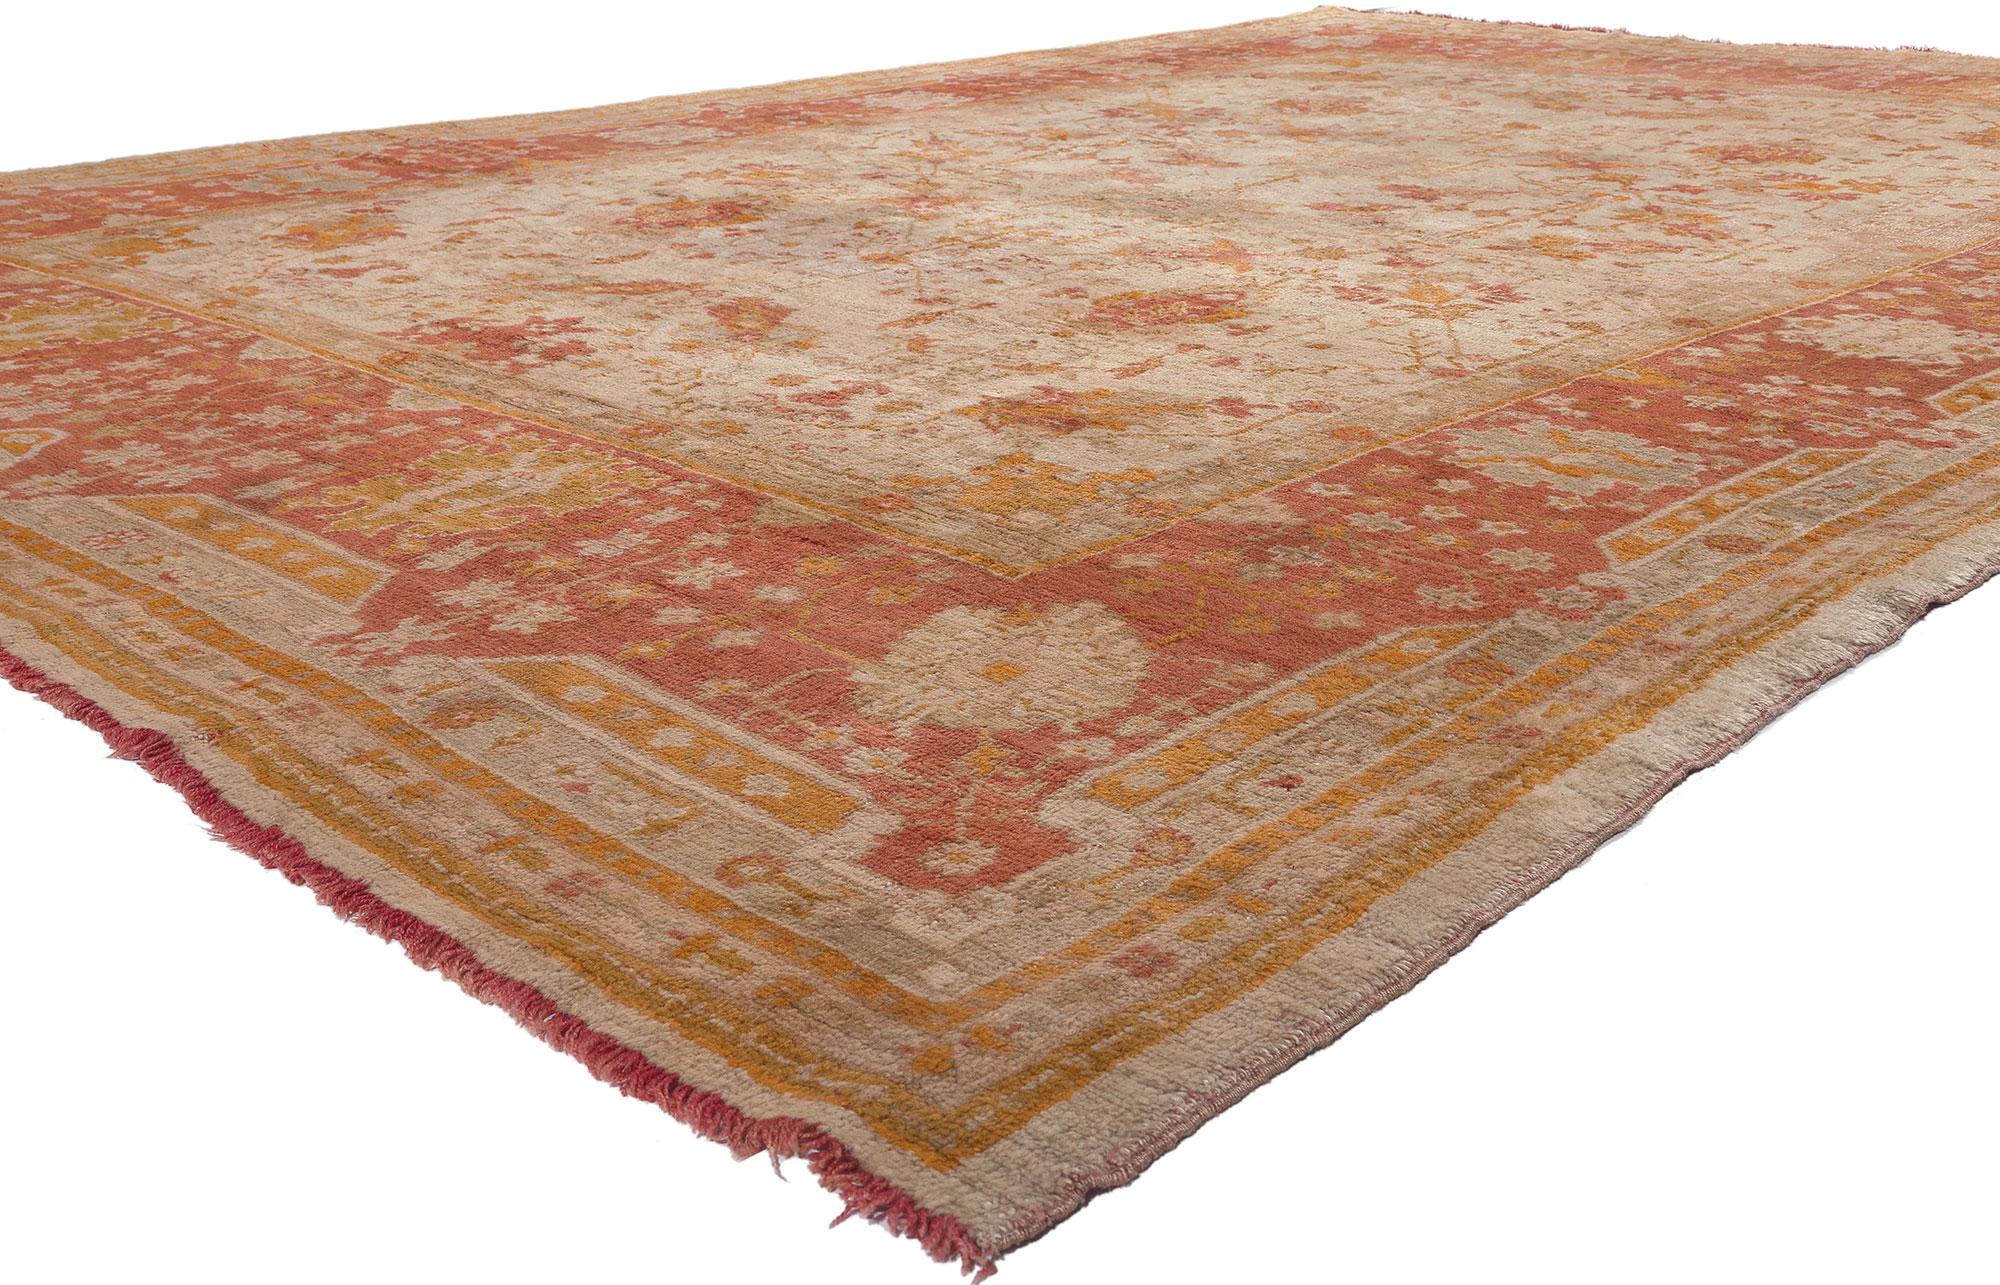 78608 Antique Turkish Oushak Rug, 10'02 x 14'07. Emanating relaxed familiarity with incredible detail and texture, this hand knotted wool antique Turkish Oushak rug is a captivating vision of woven beauty. The decorative botanical design and warm